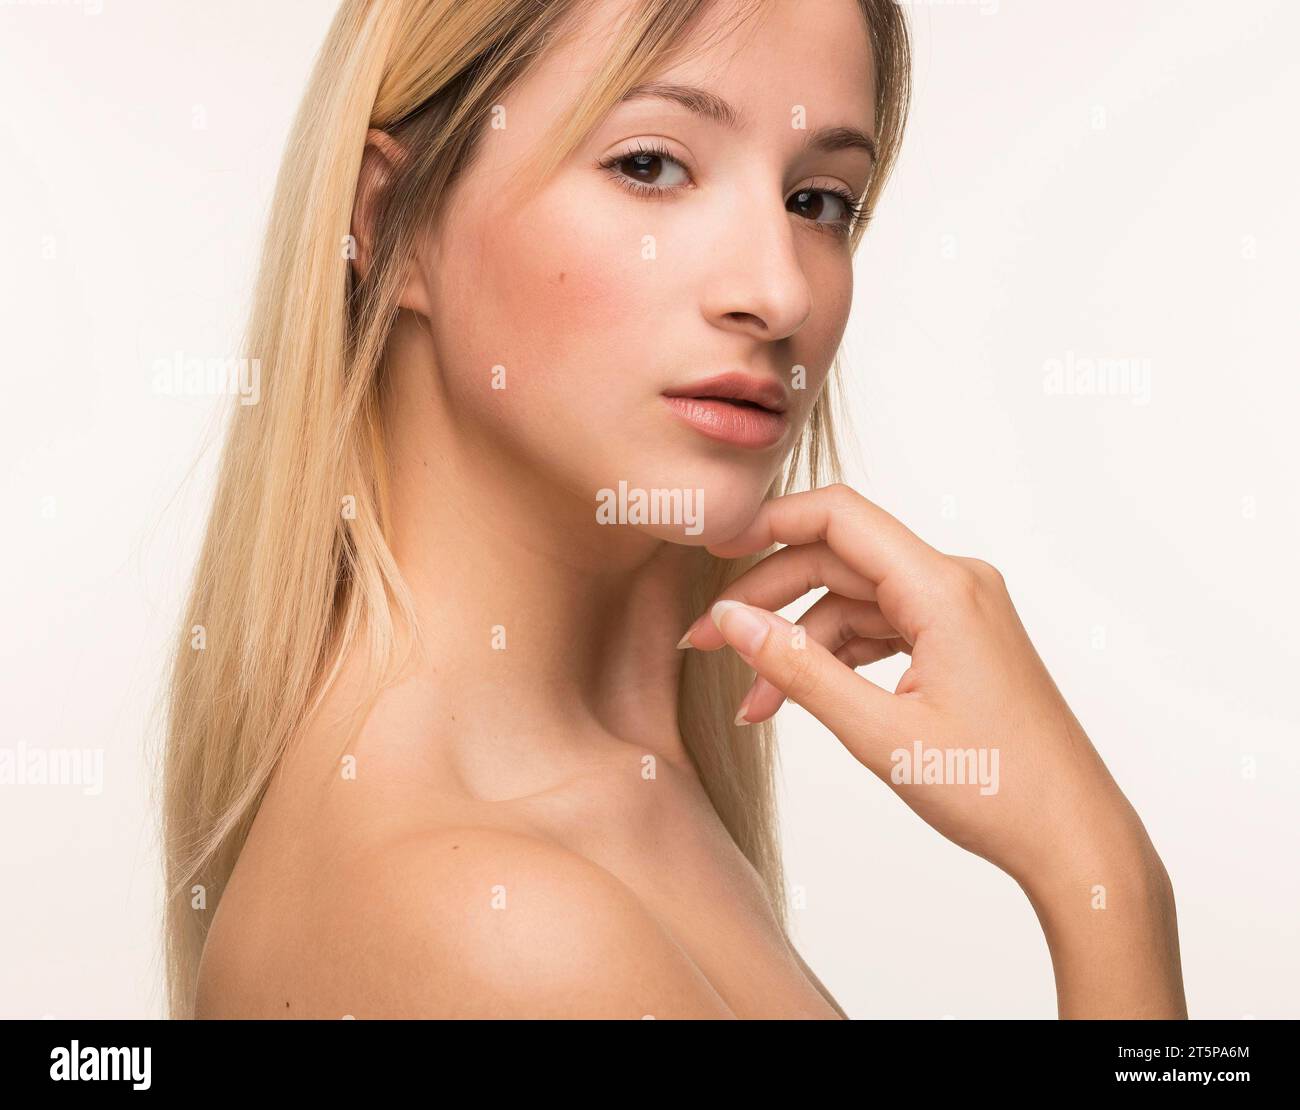 Young woman hand chin pose Stock Photo